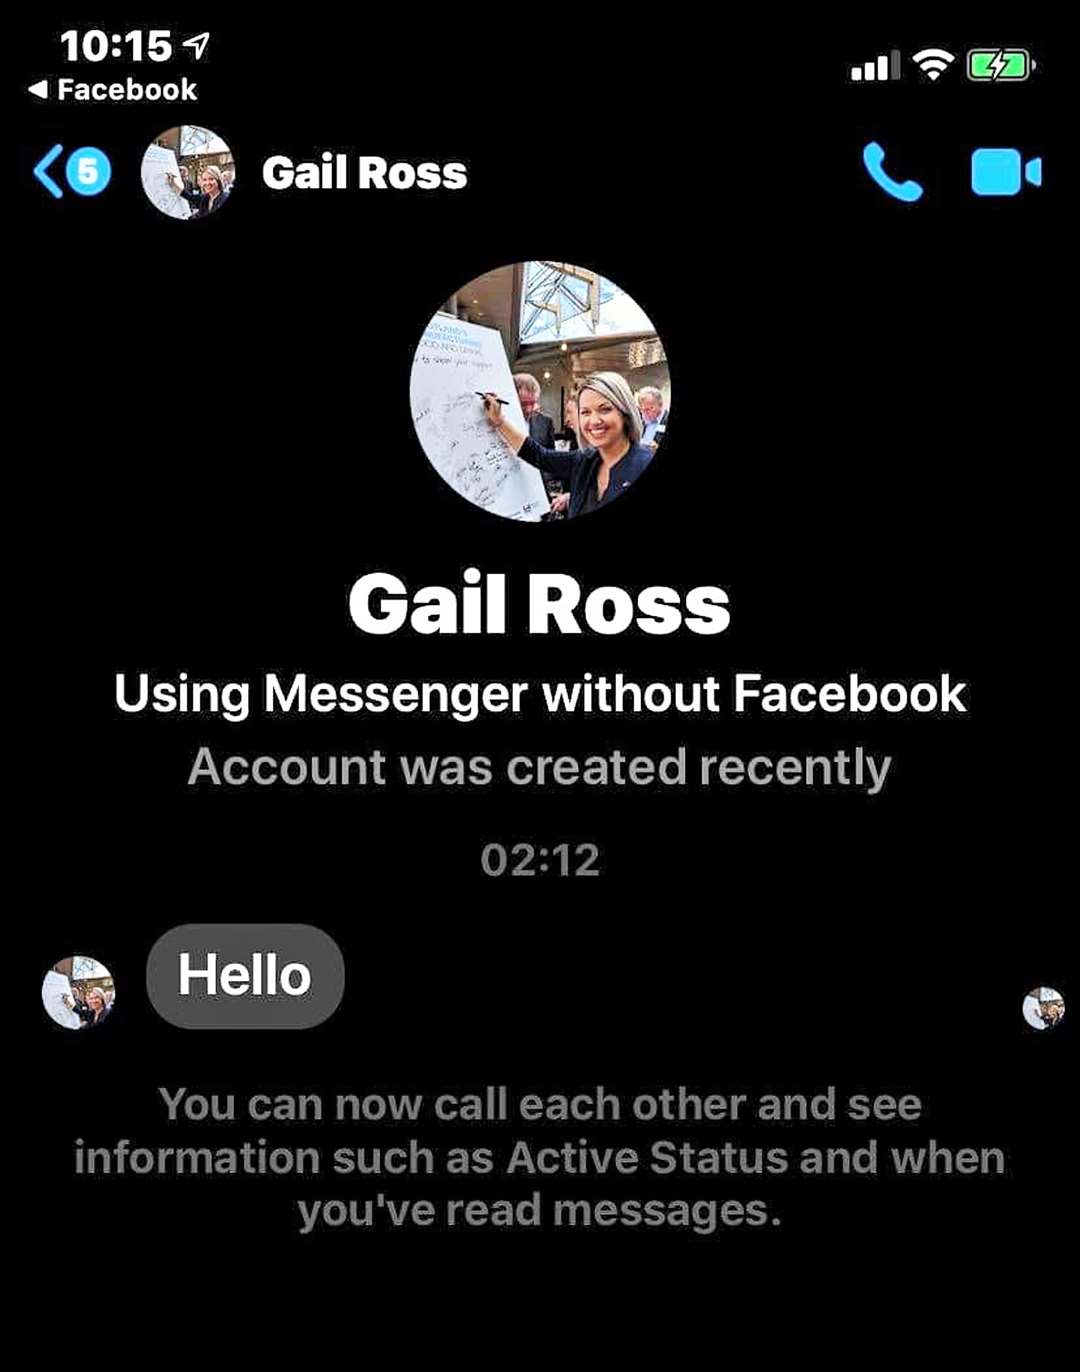 The fake Gail Ross account has now been reported and deleted.